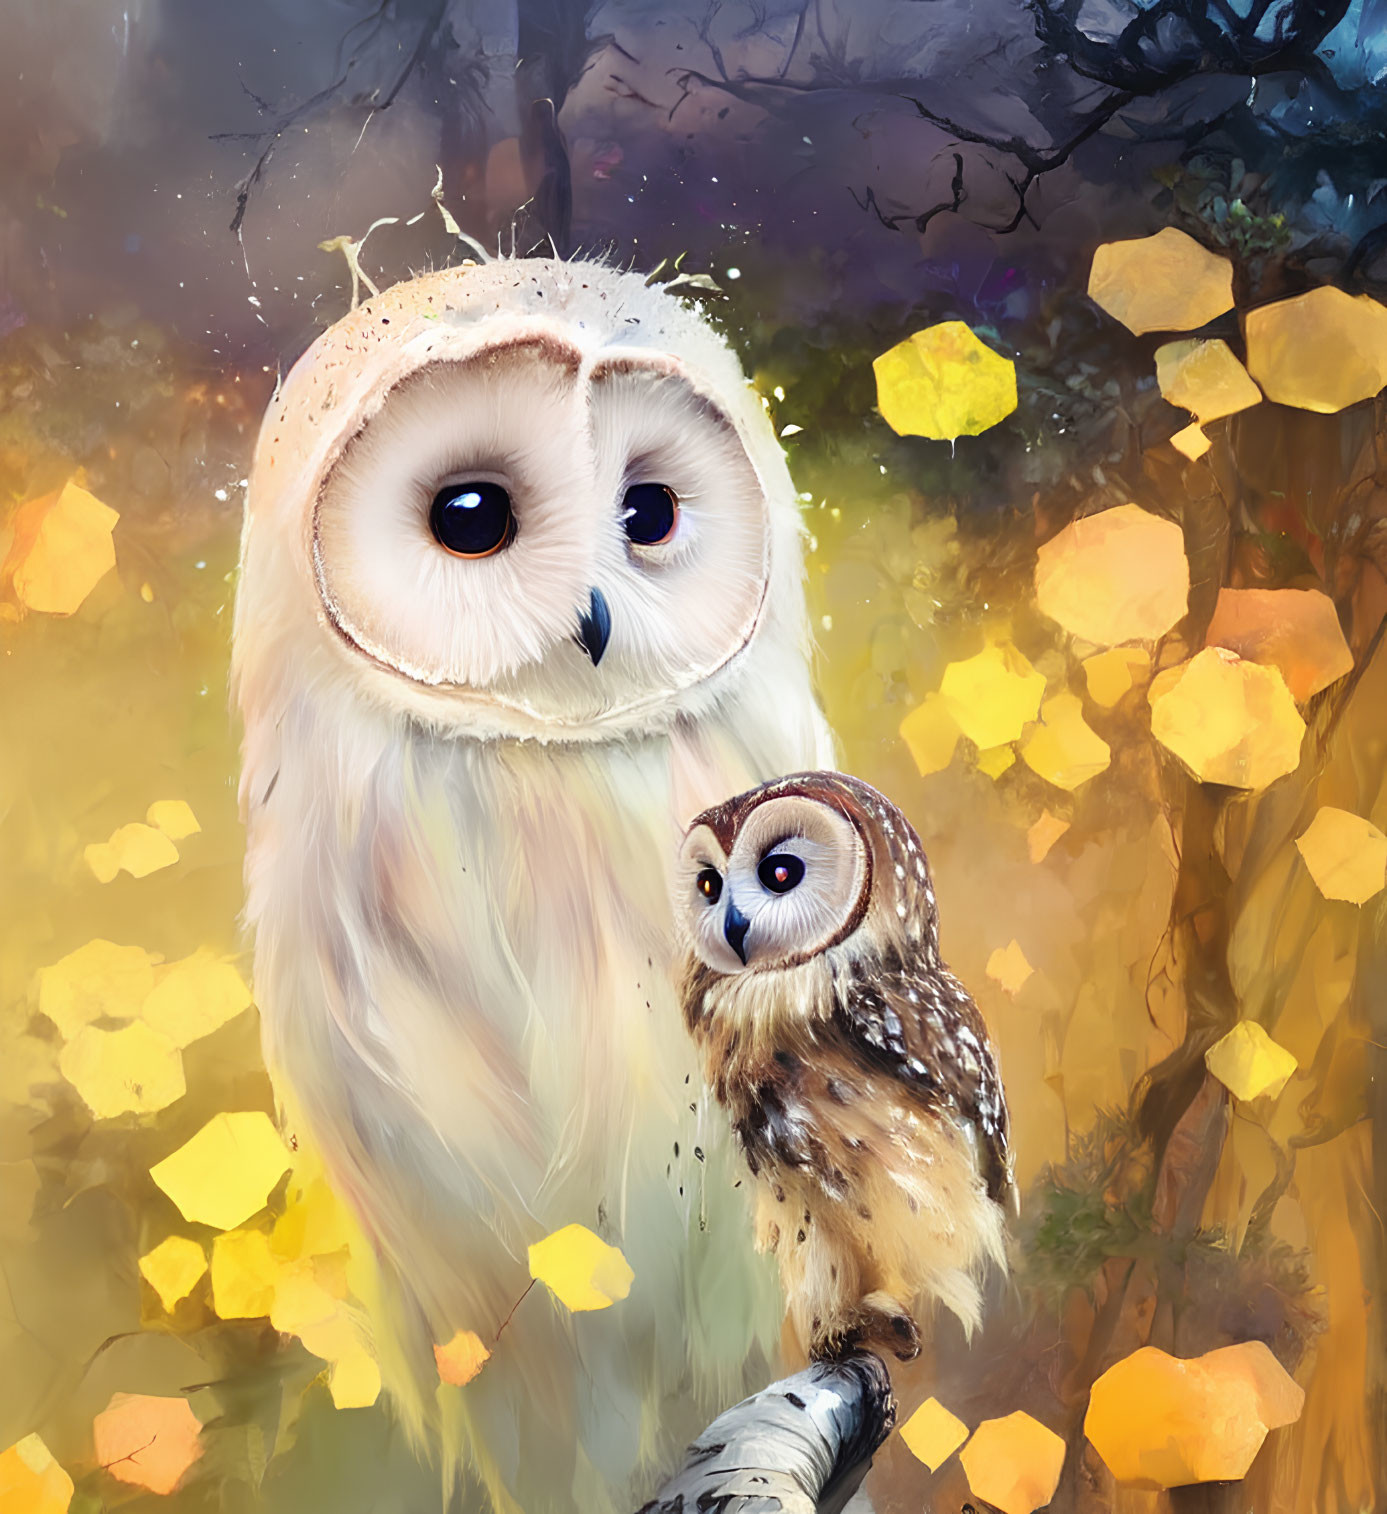 Whimsical illustration of fluffy white and brown owls in a misty forest